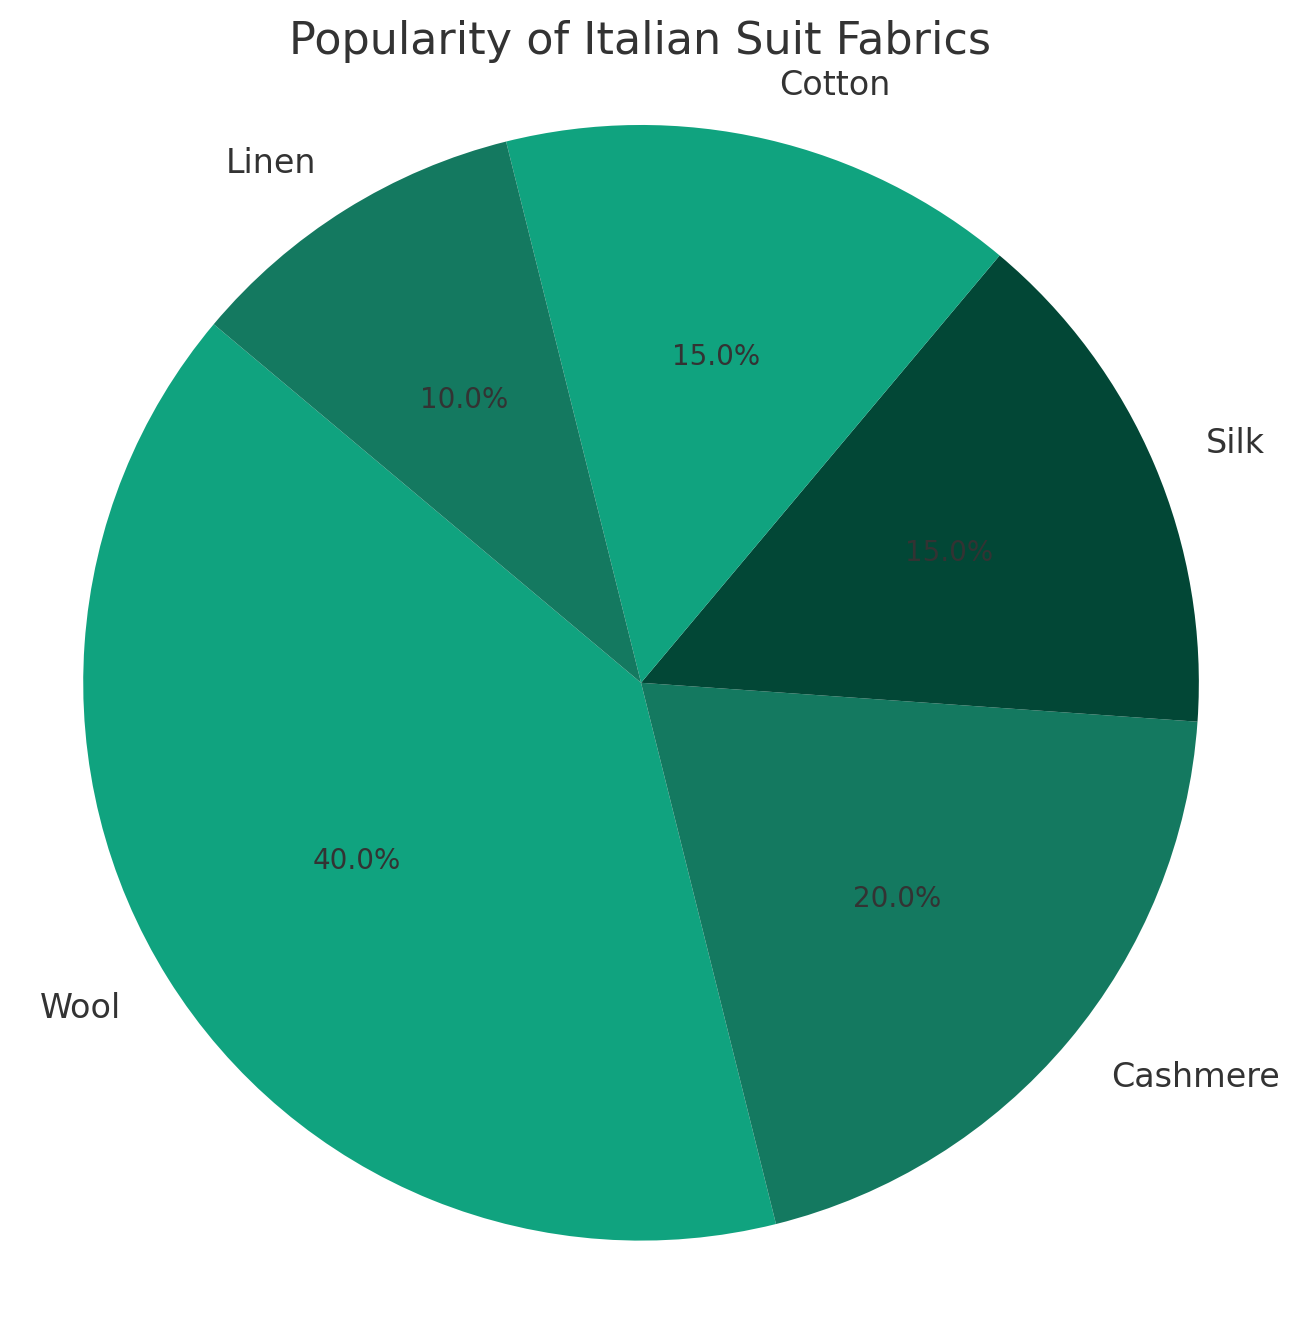 pie chart showing the popularity of italian suit fabrics
